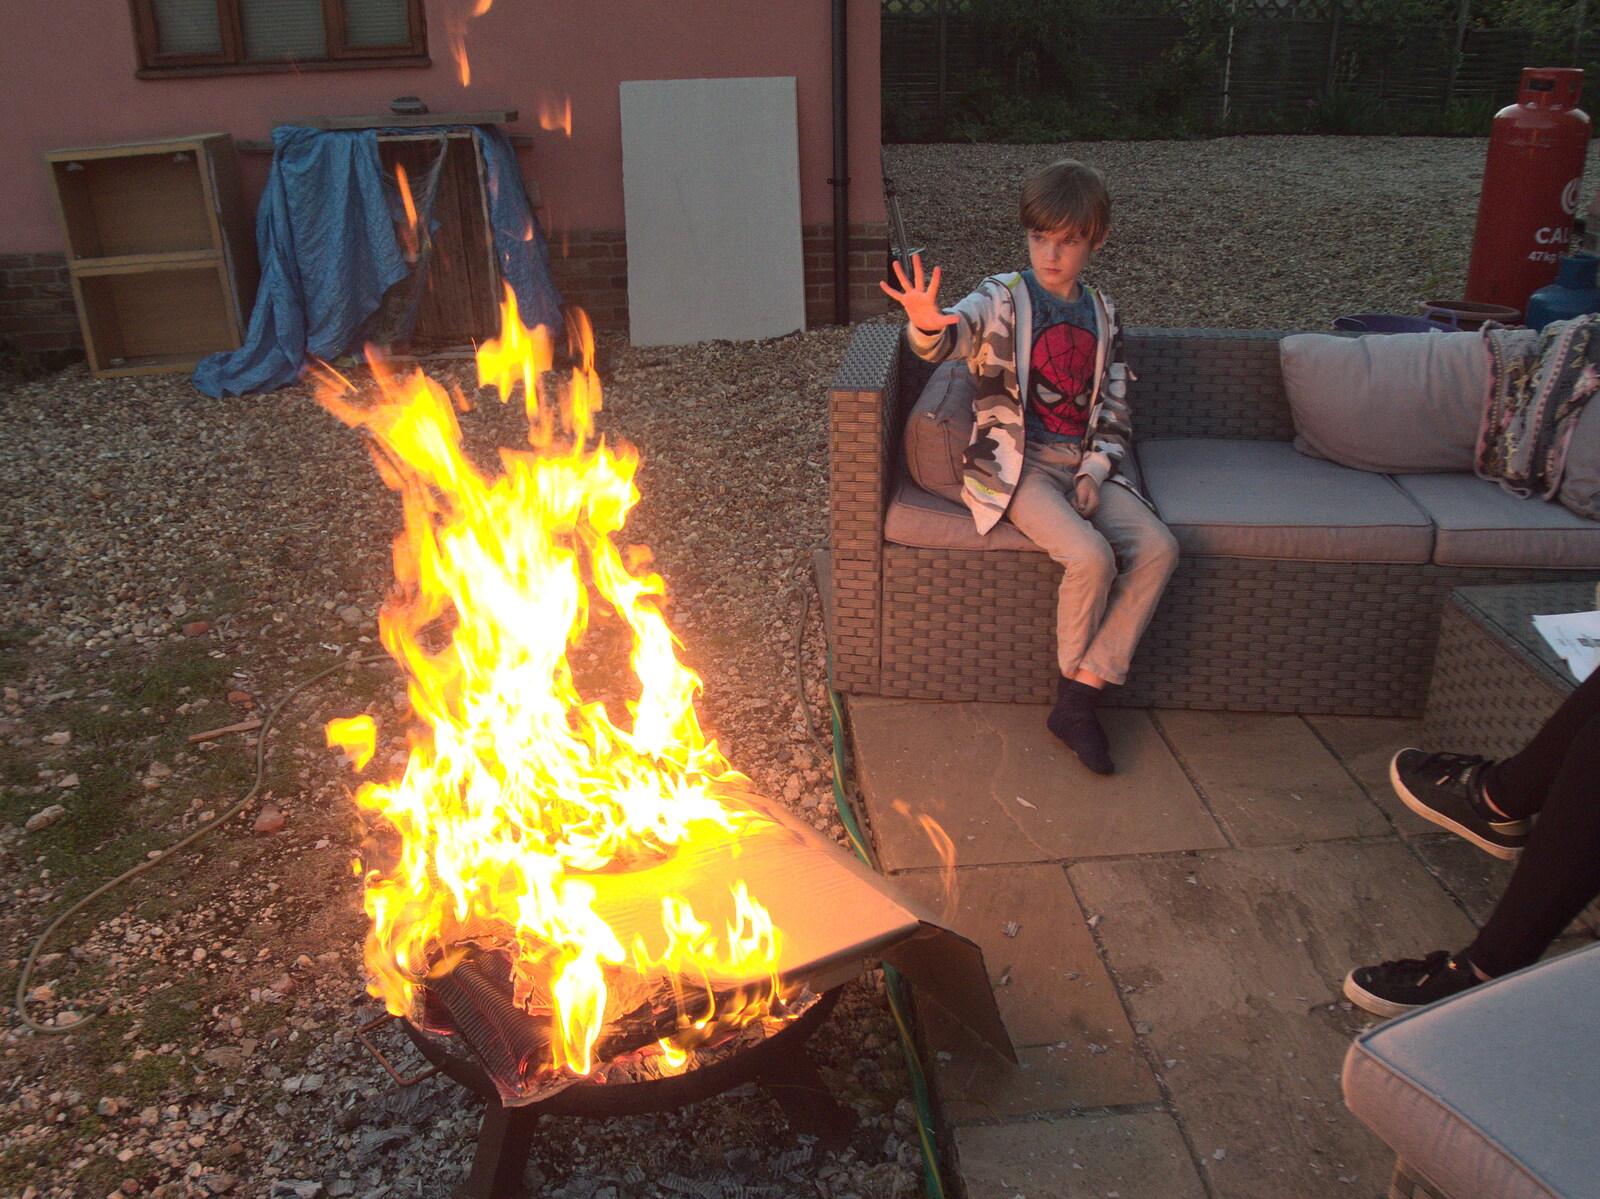 Harry gets the fire going from Garden Centres, and Hamish Visits, Brome, Suffolk - 28th May 2021